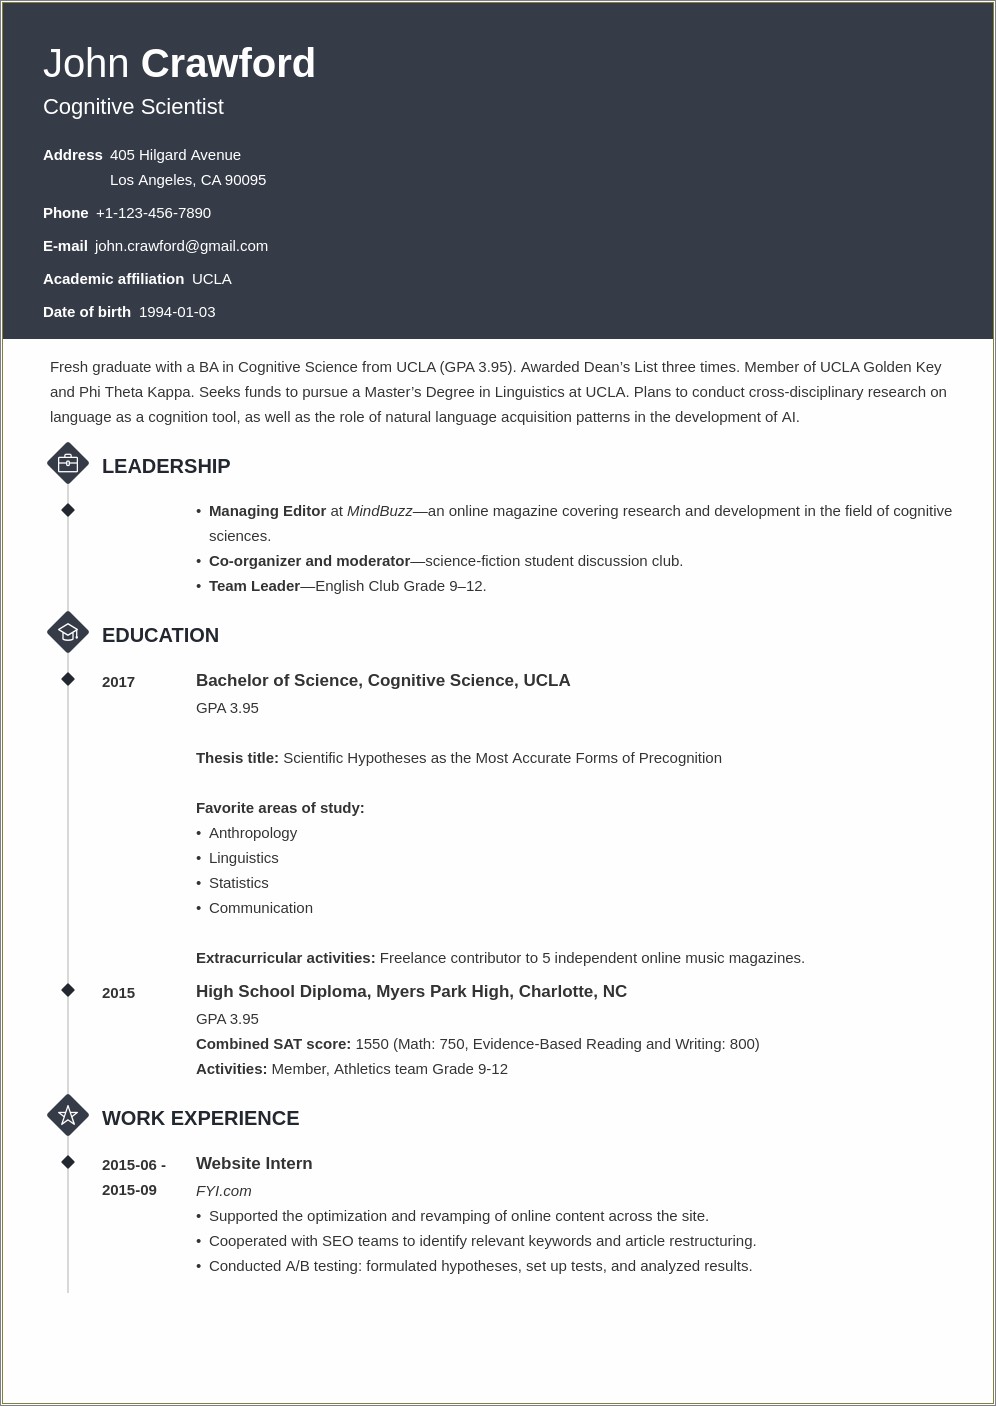 Resume With Bachelor's Degree Sample